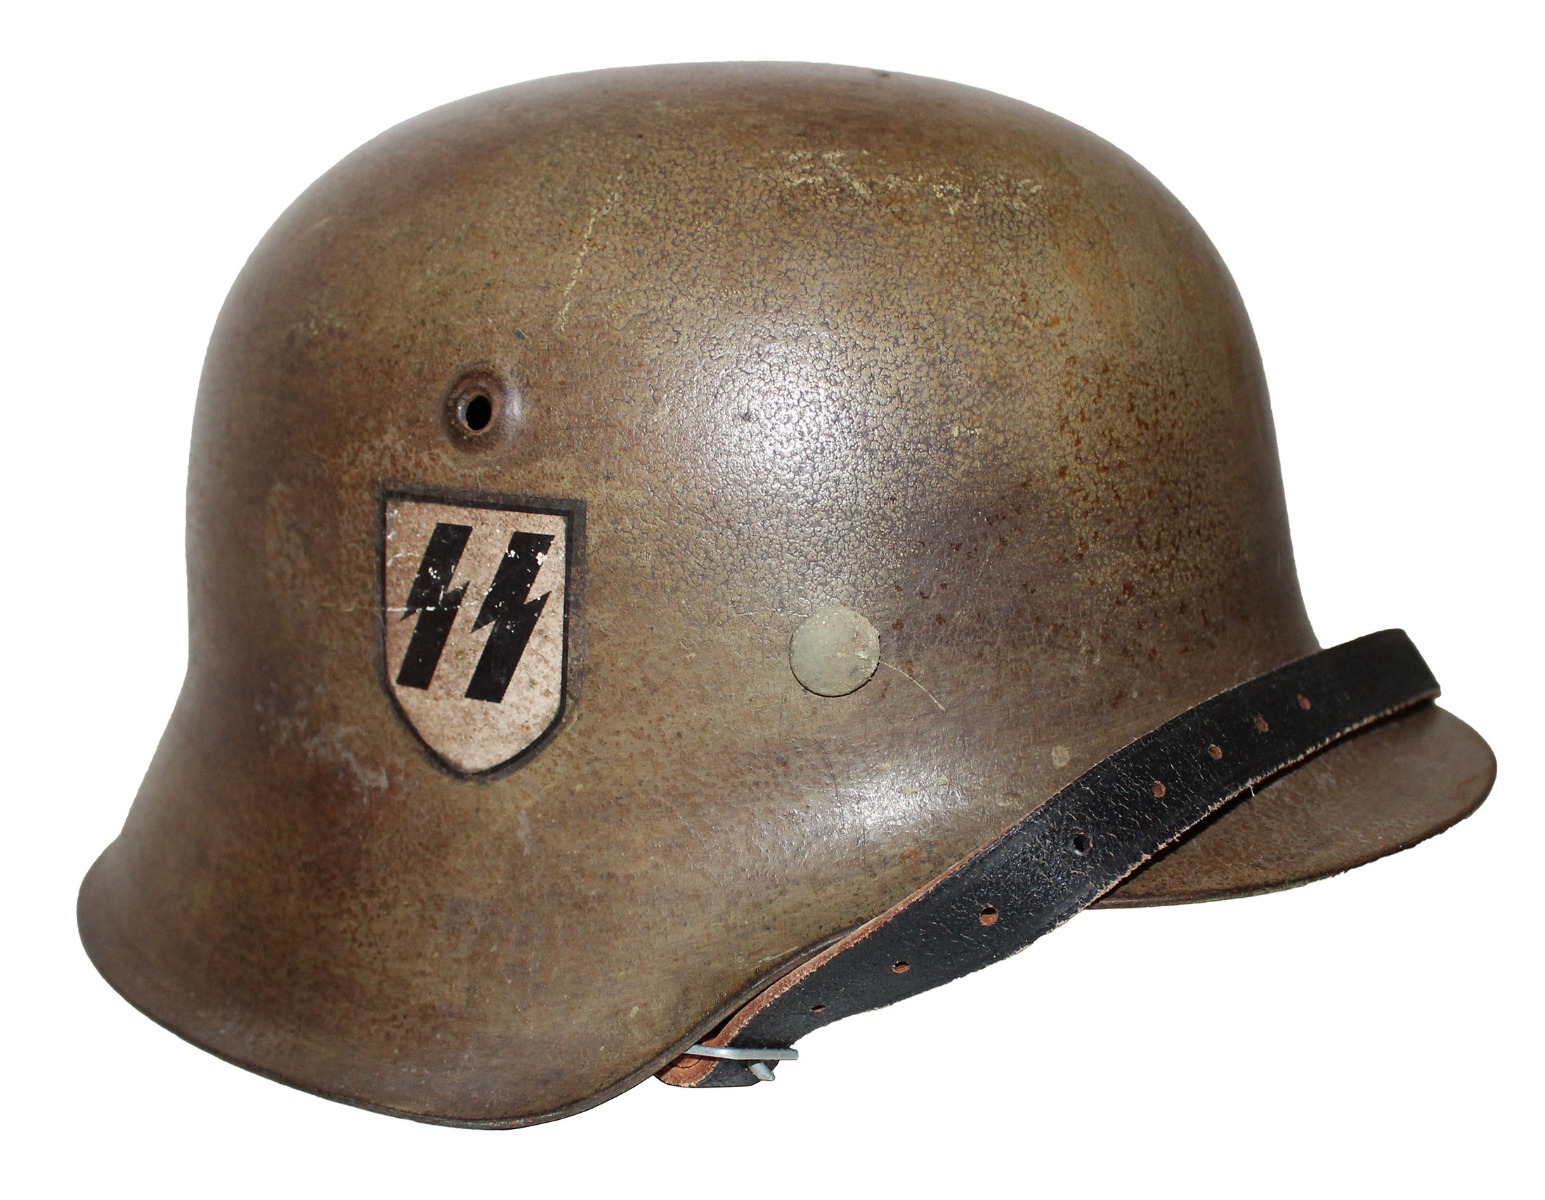 GERMAN WW2 RESTORED SS M42 HELMET WITH SINGLE SS DECAL ORIGINAL 64 SHELL NORMANDY CAMOUFLAGE